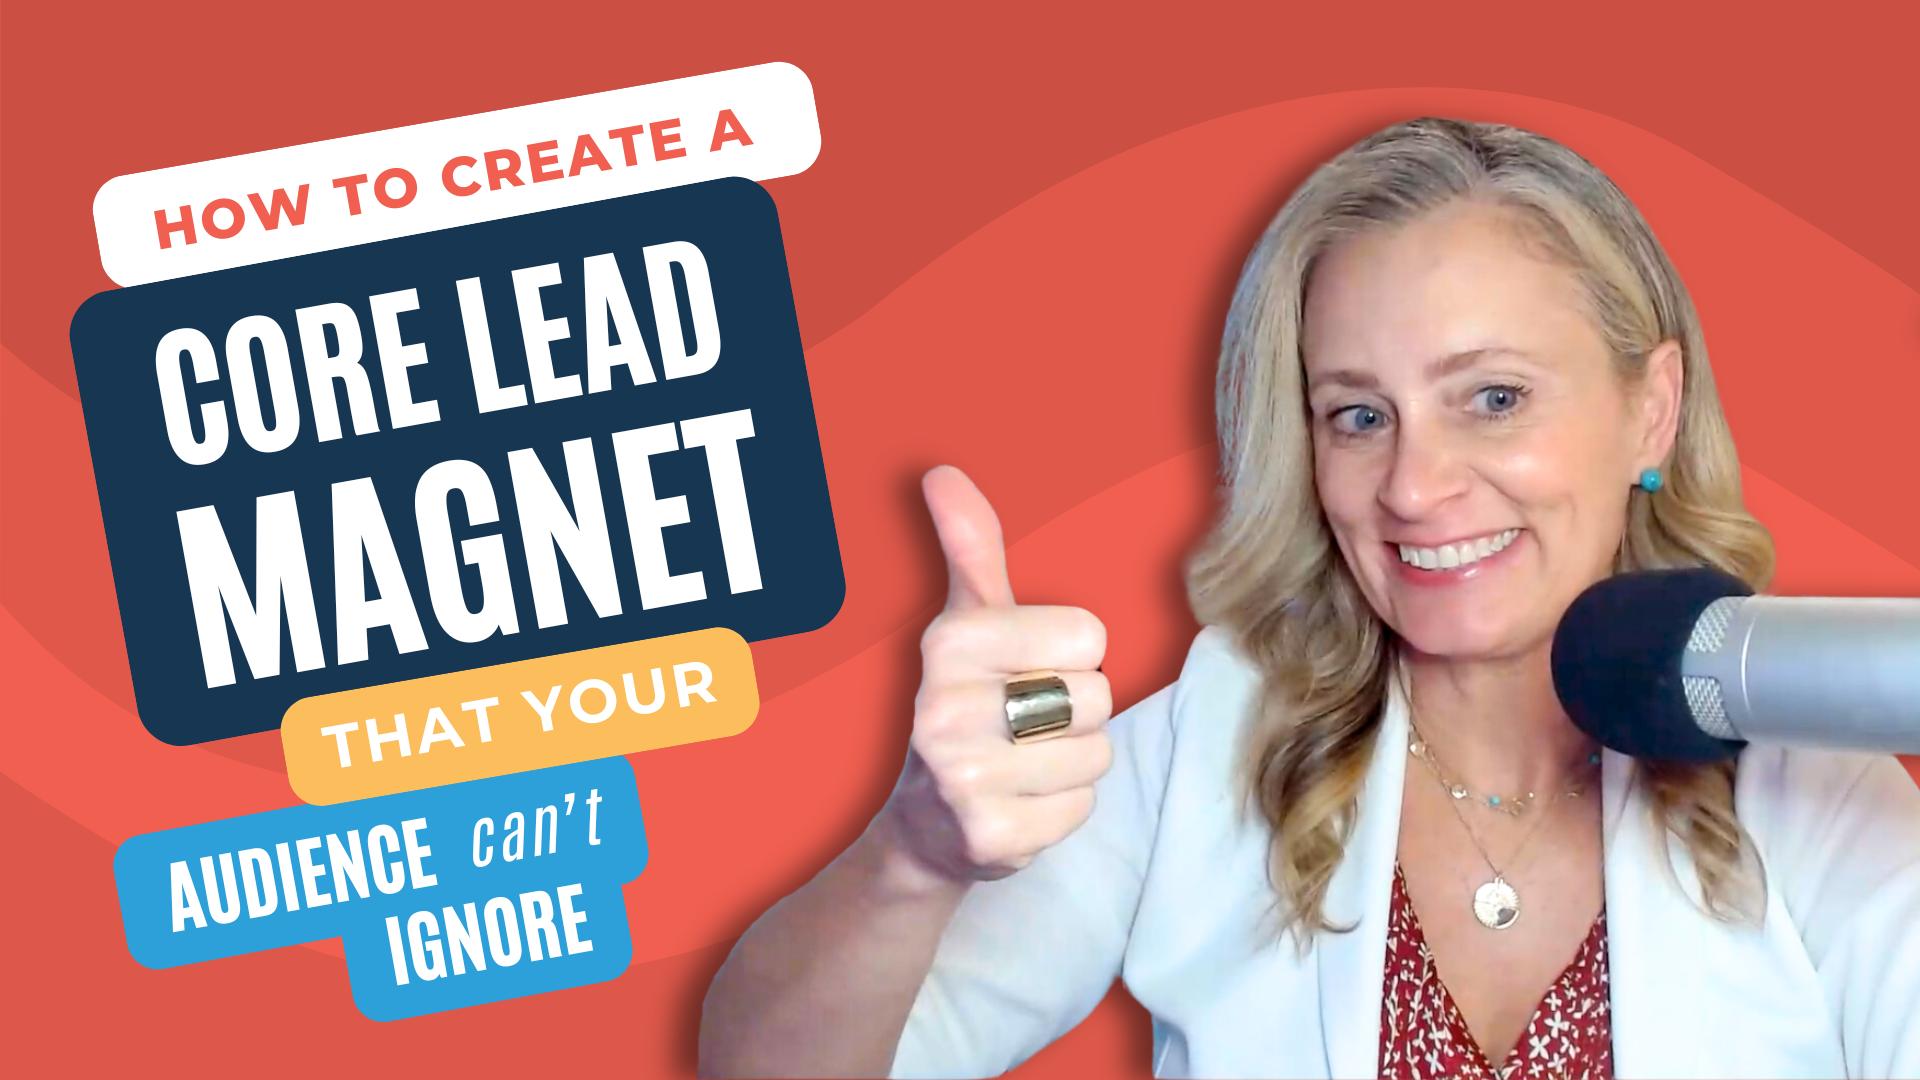 How To Create A Core Lead Magnet That Your Audience Can’t Ignore?